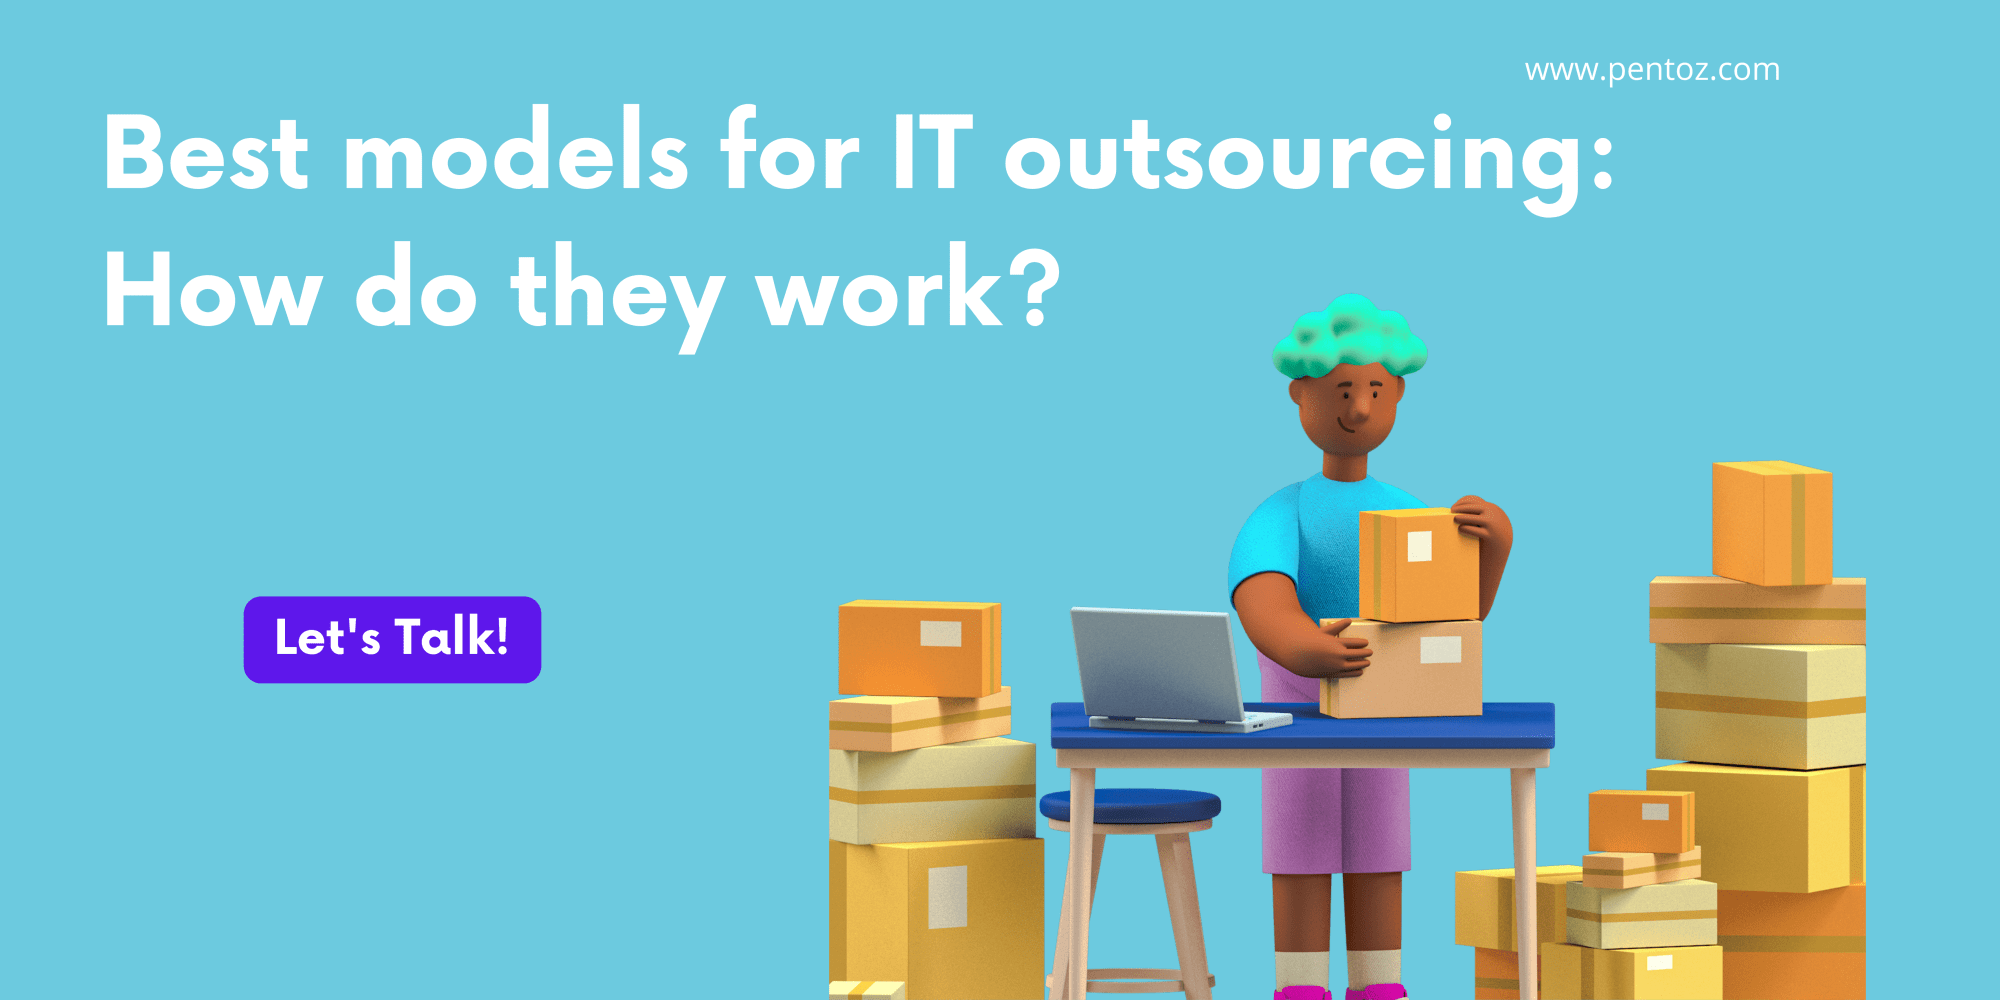 Best models for IT outsourcing: How do they work?